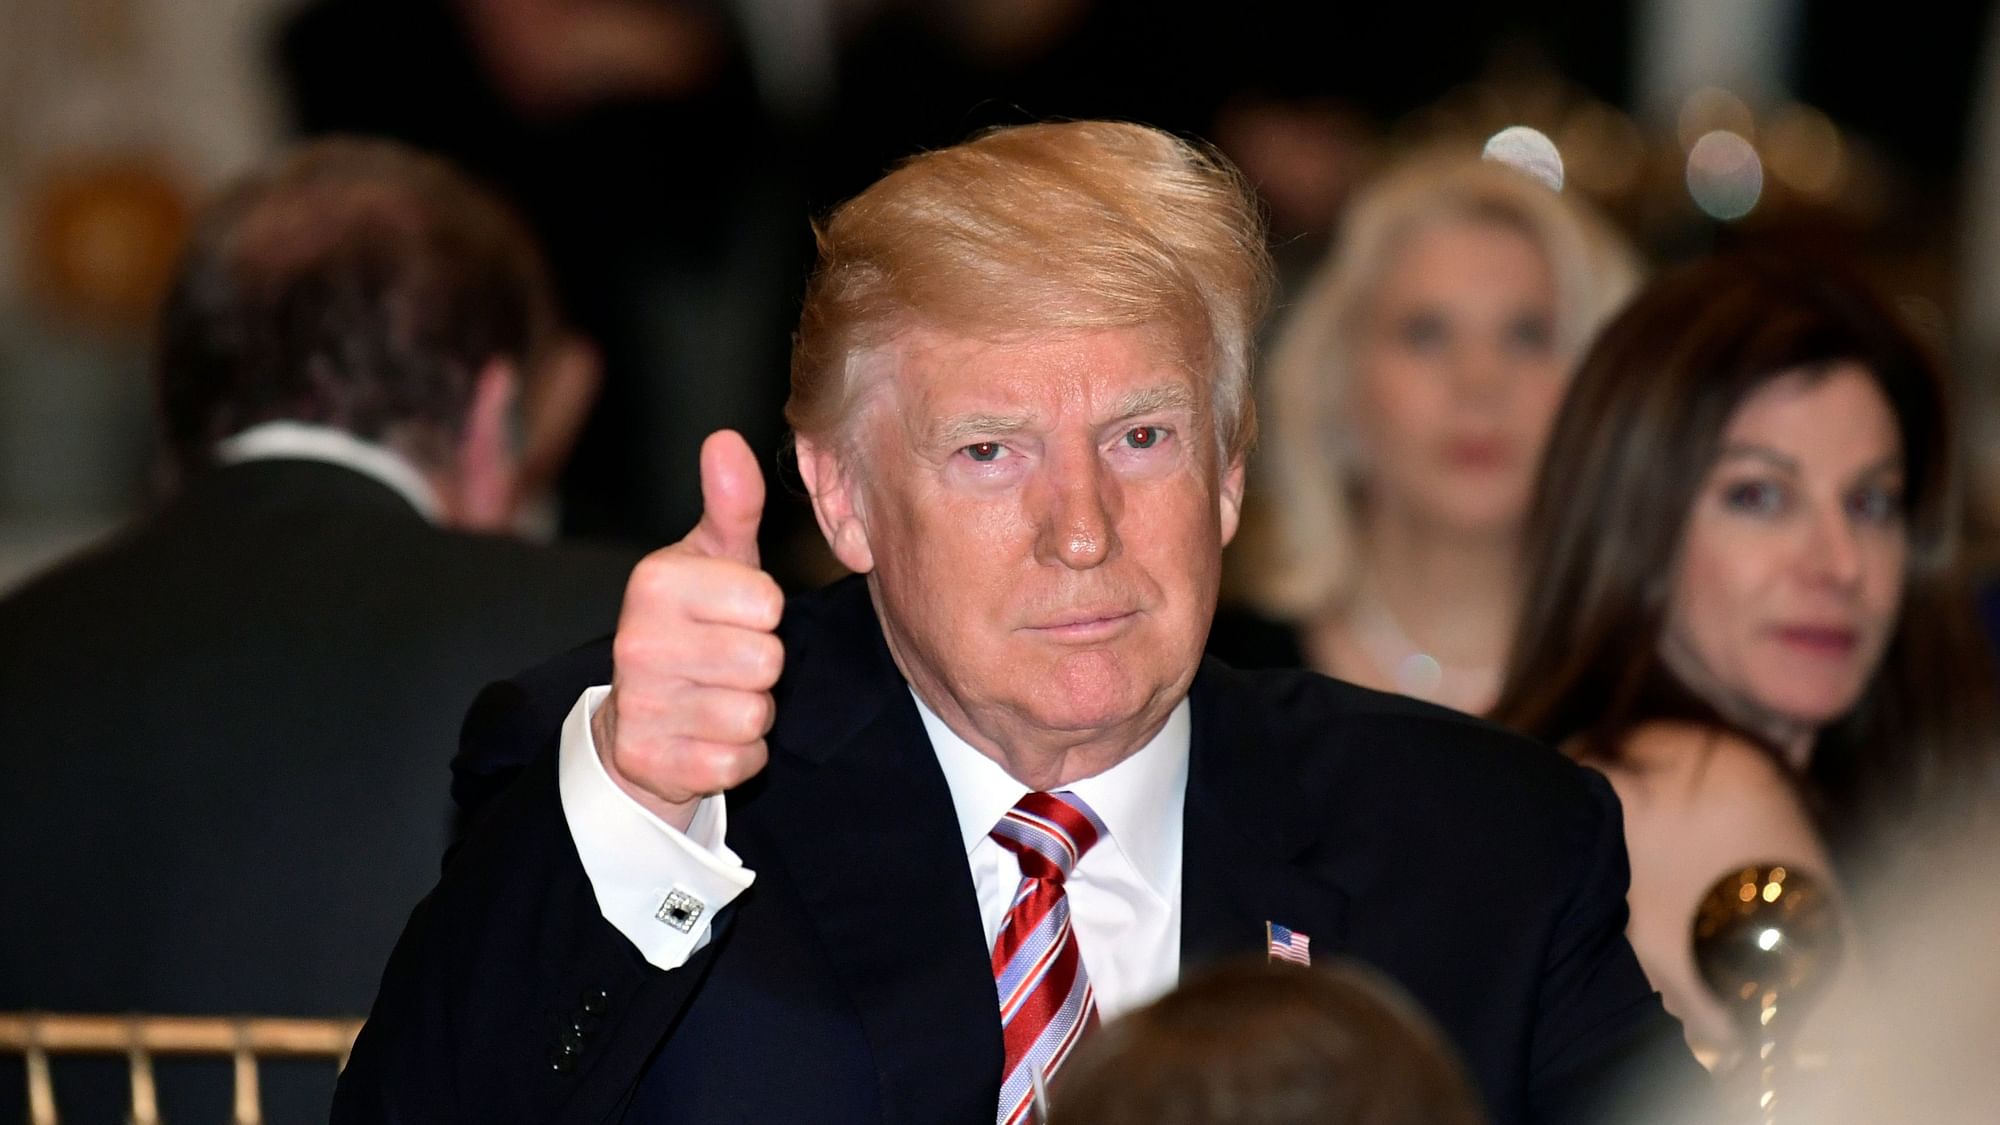 President Donald Trump gives a thumbs-up as he has Thanksgiving Day dinner at his Mar-a-Lago estate in Palm Beach, Florida, Thursday, November 22, 2018.